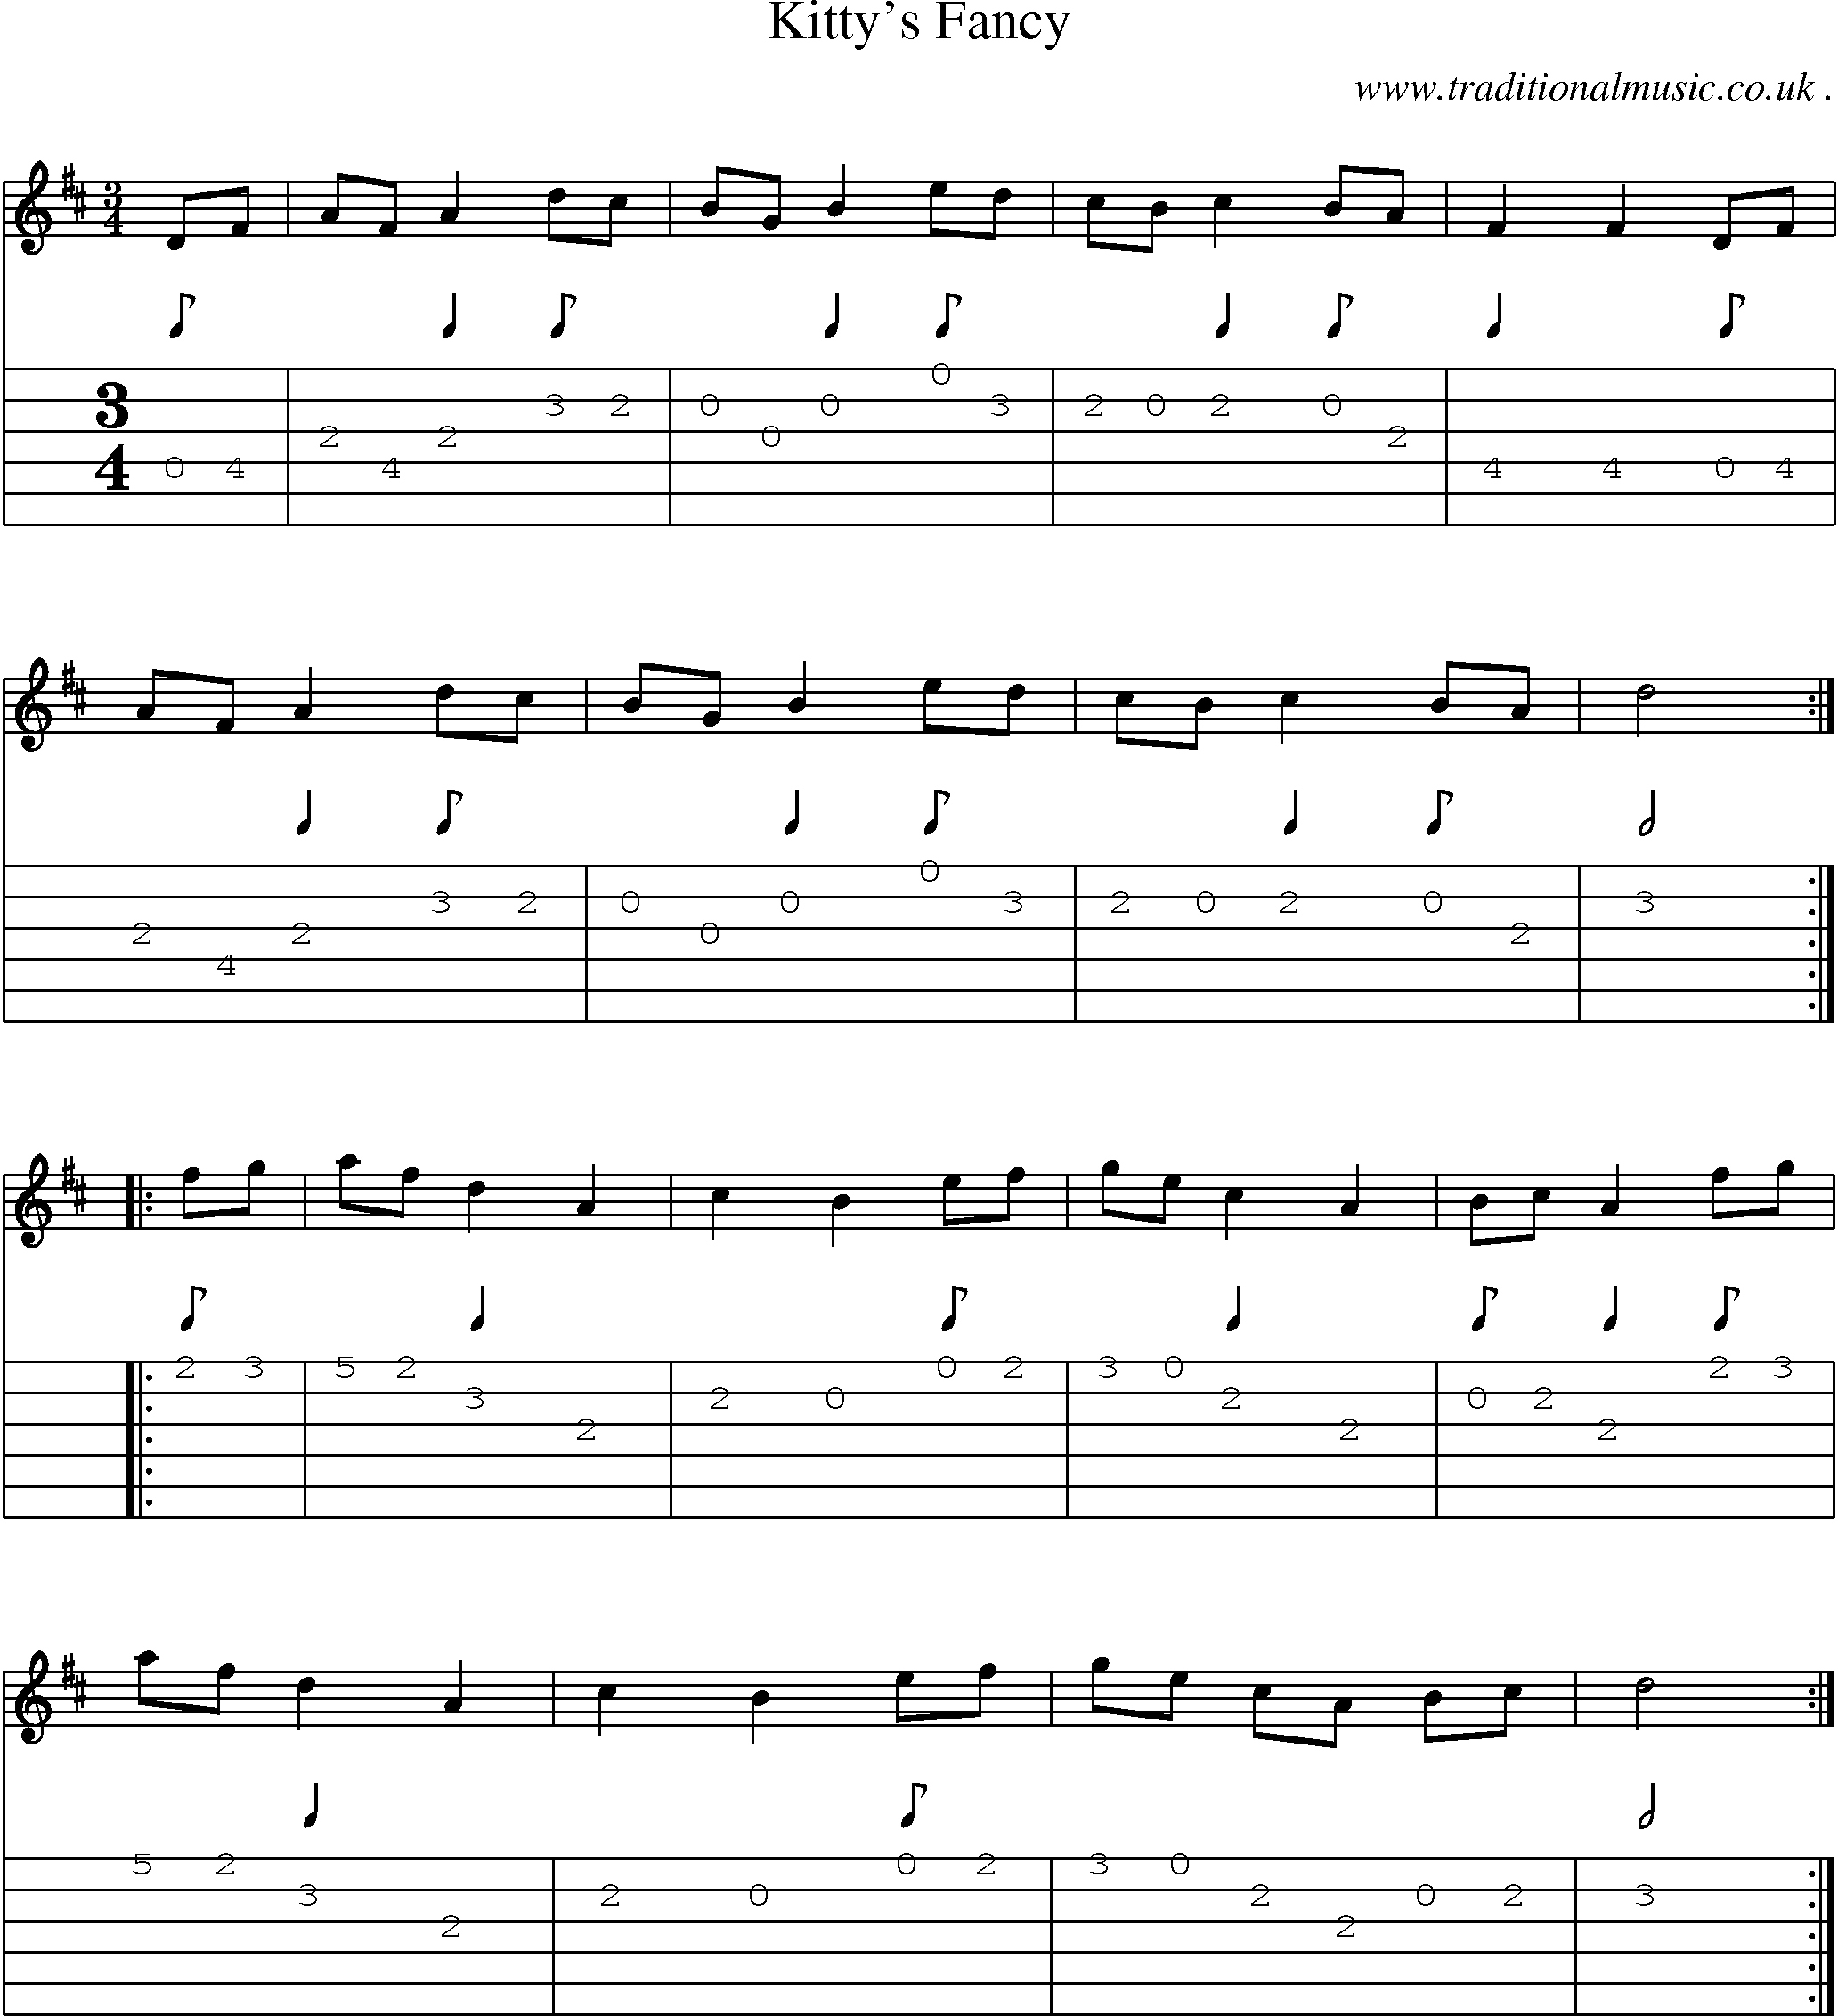 Sheet-Music and Guitar Tabs for Kittys Fancy